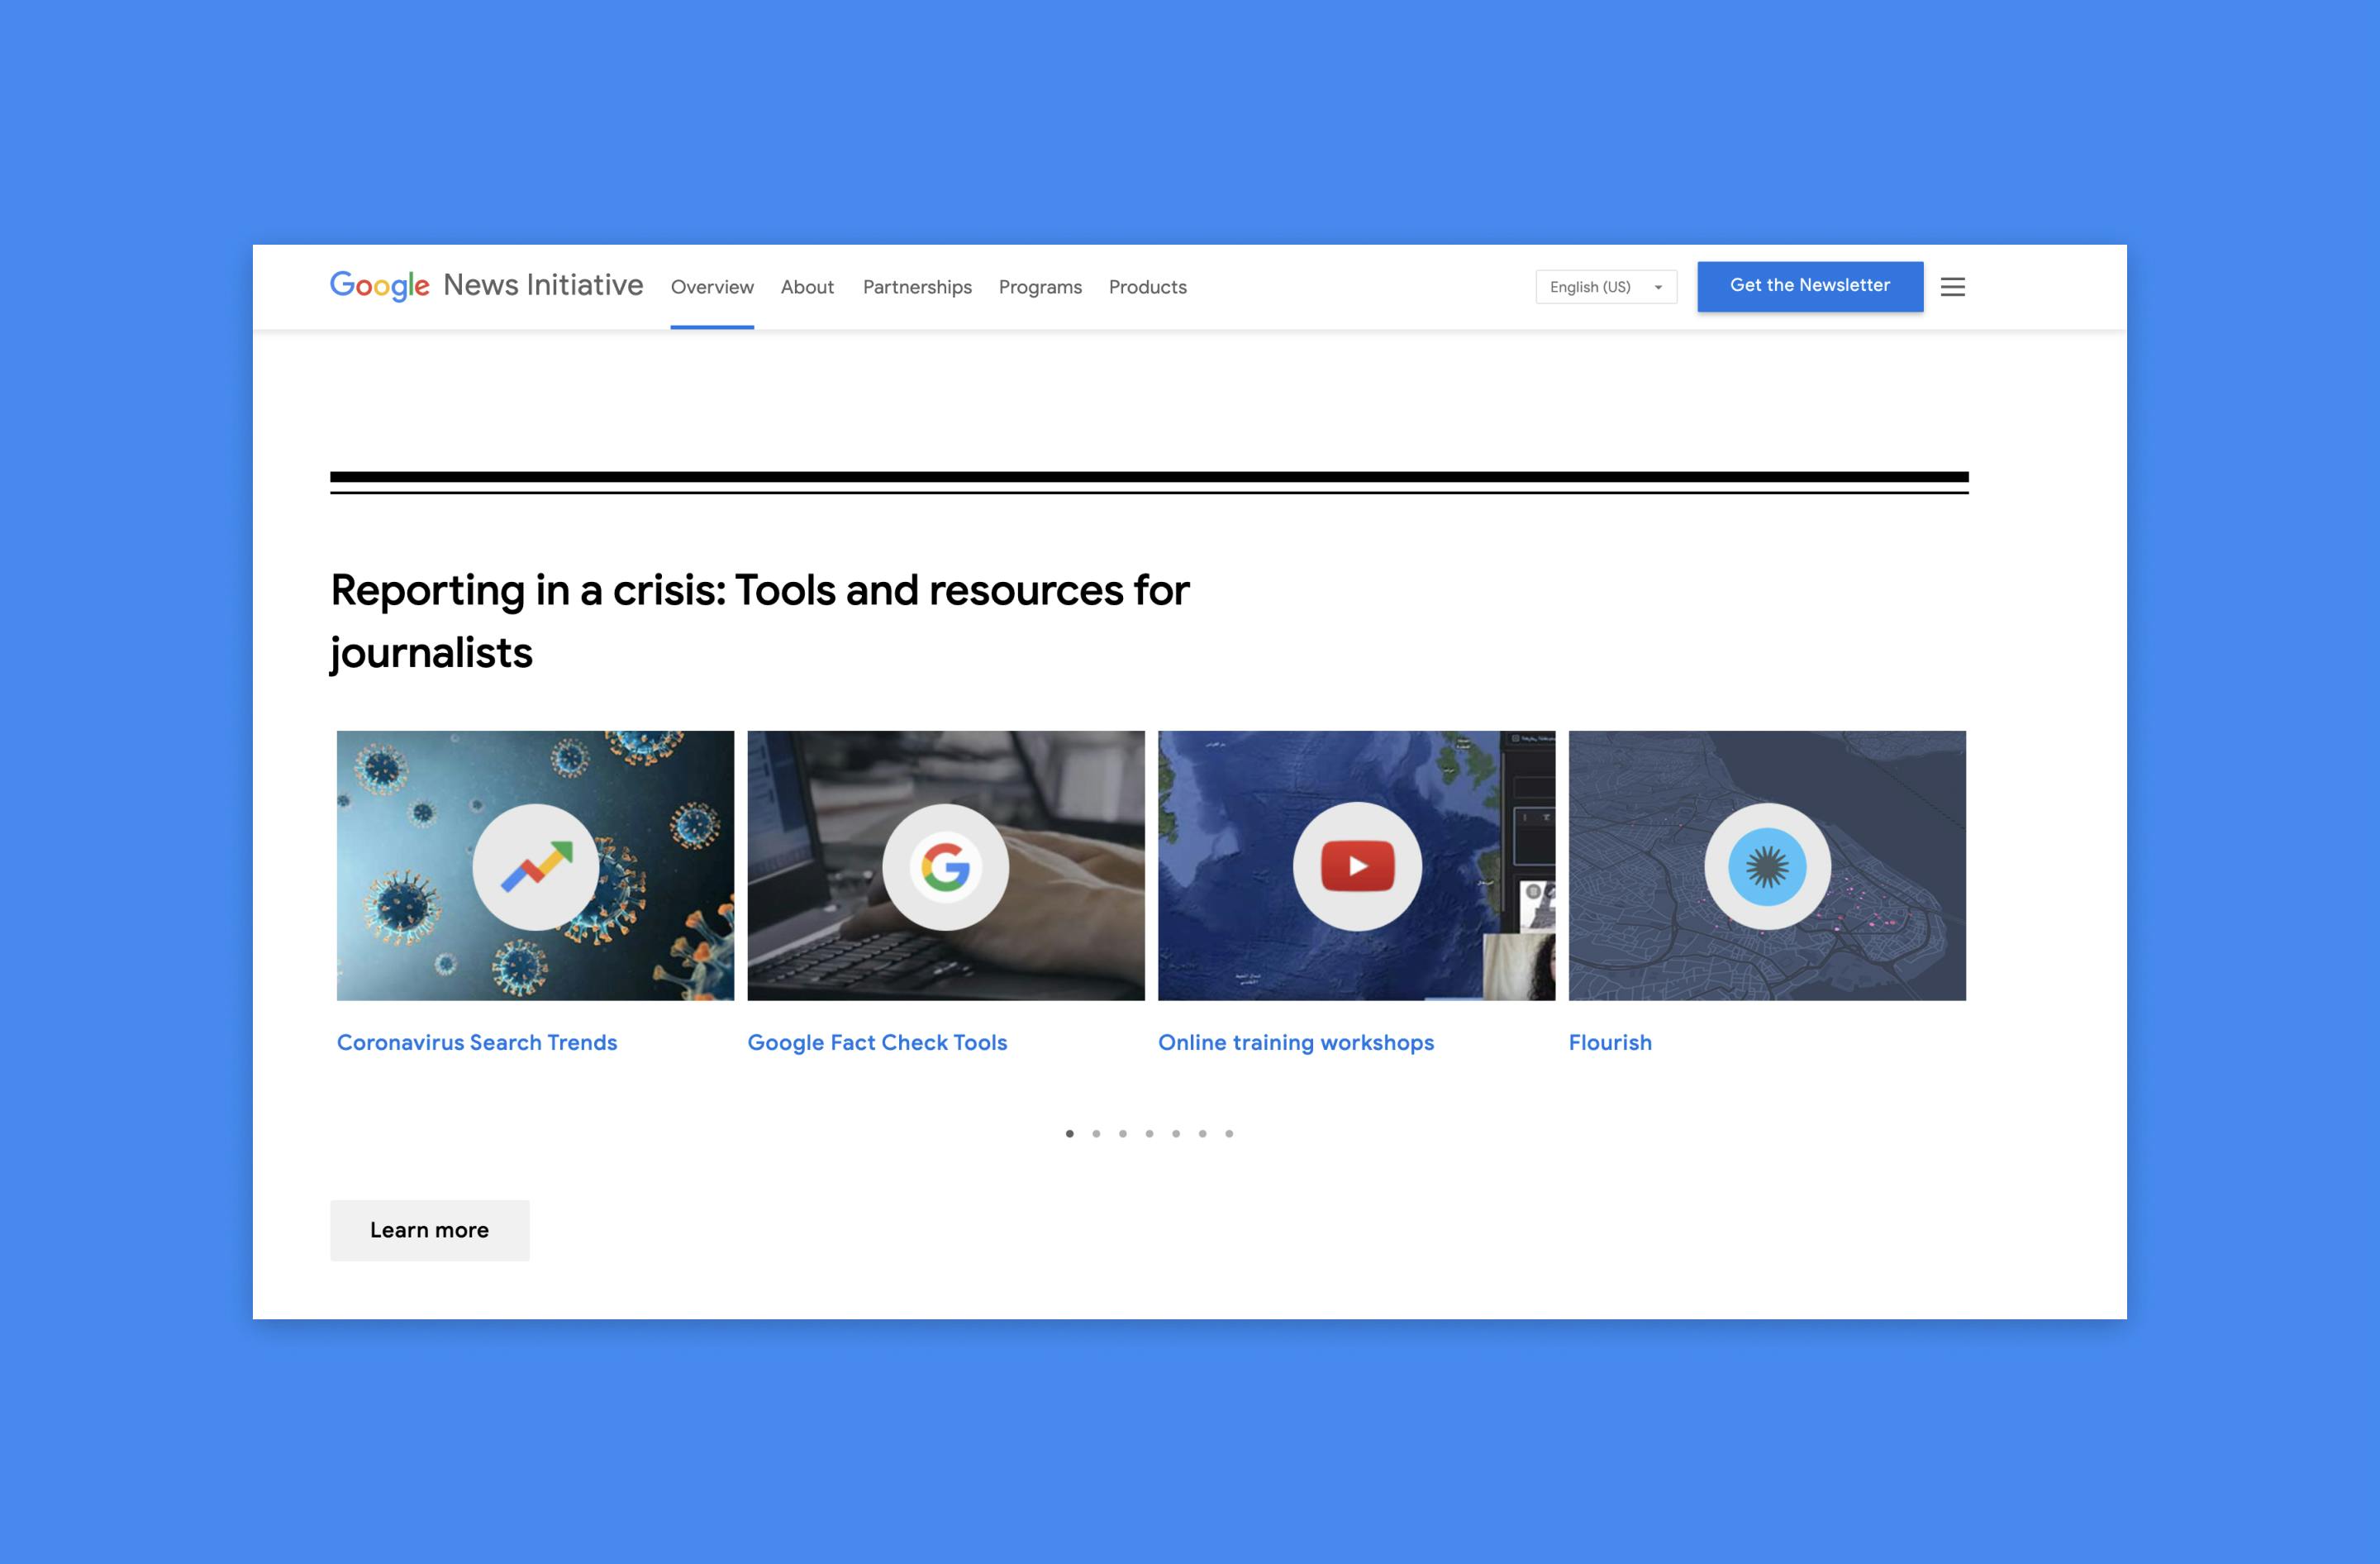 Part of the Google News Initiative website is shown on a bright blue background. The site is showing a carousel of thumbnails titled "Reporting in a crisis: Tools and resources for journalists"